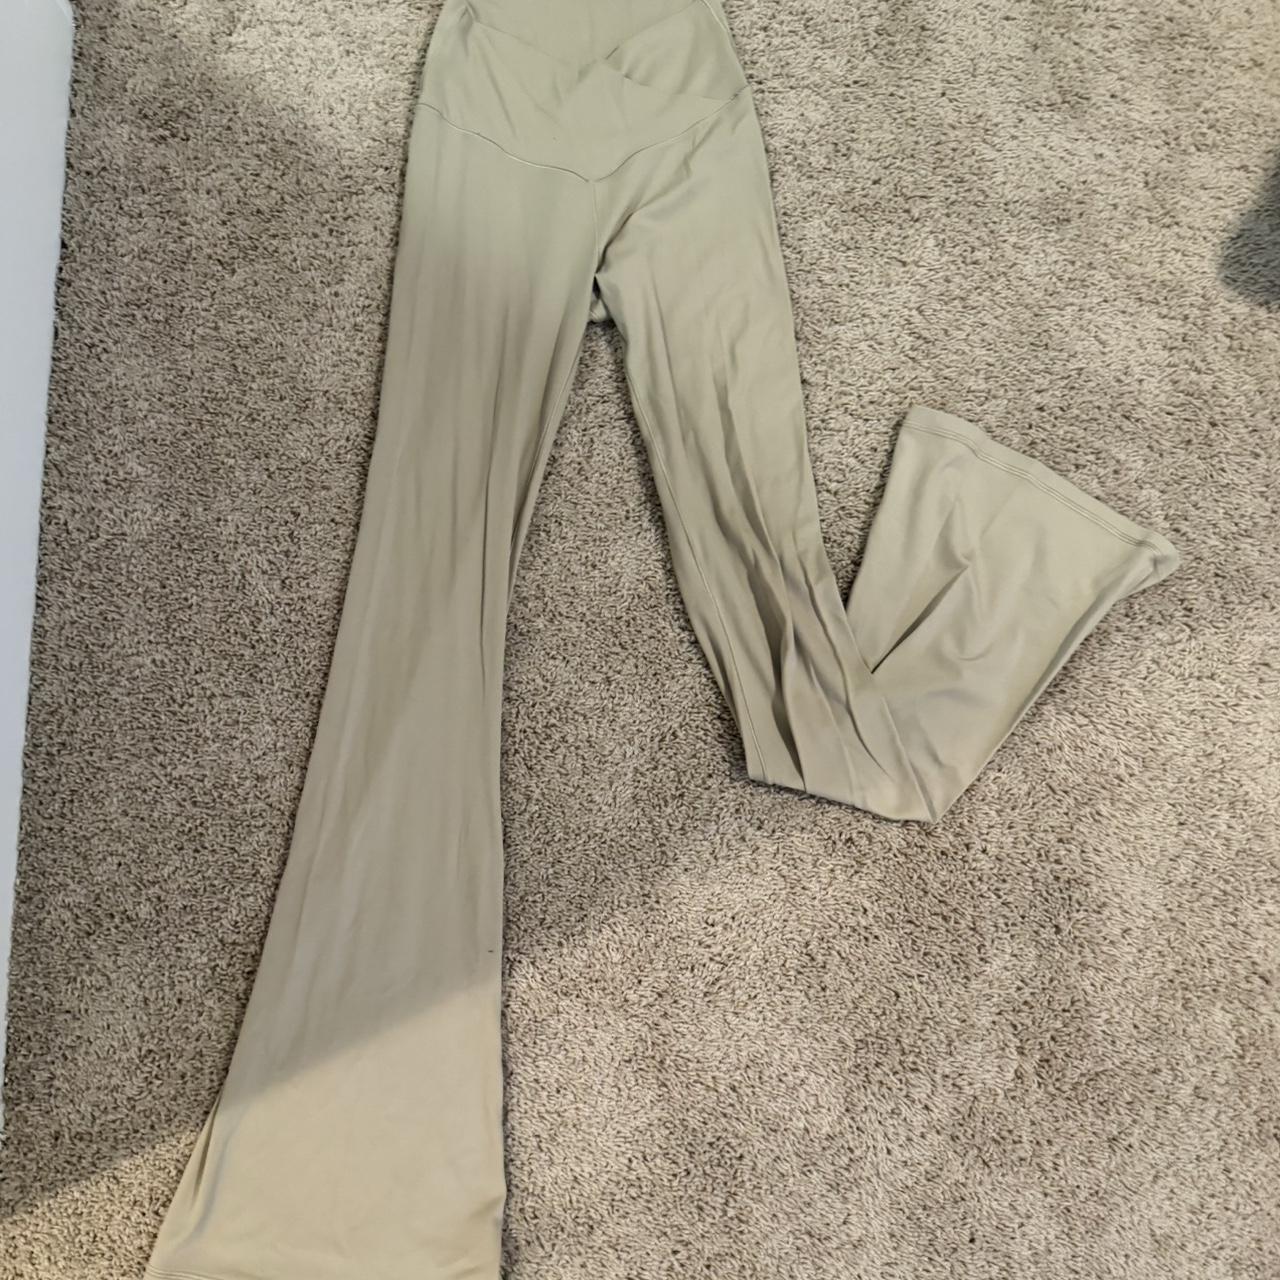 crossover flare leggings Model is very tall, but - Depop